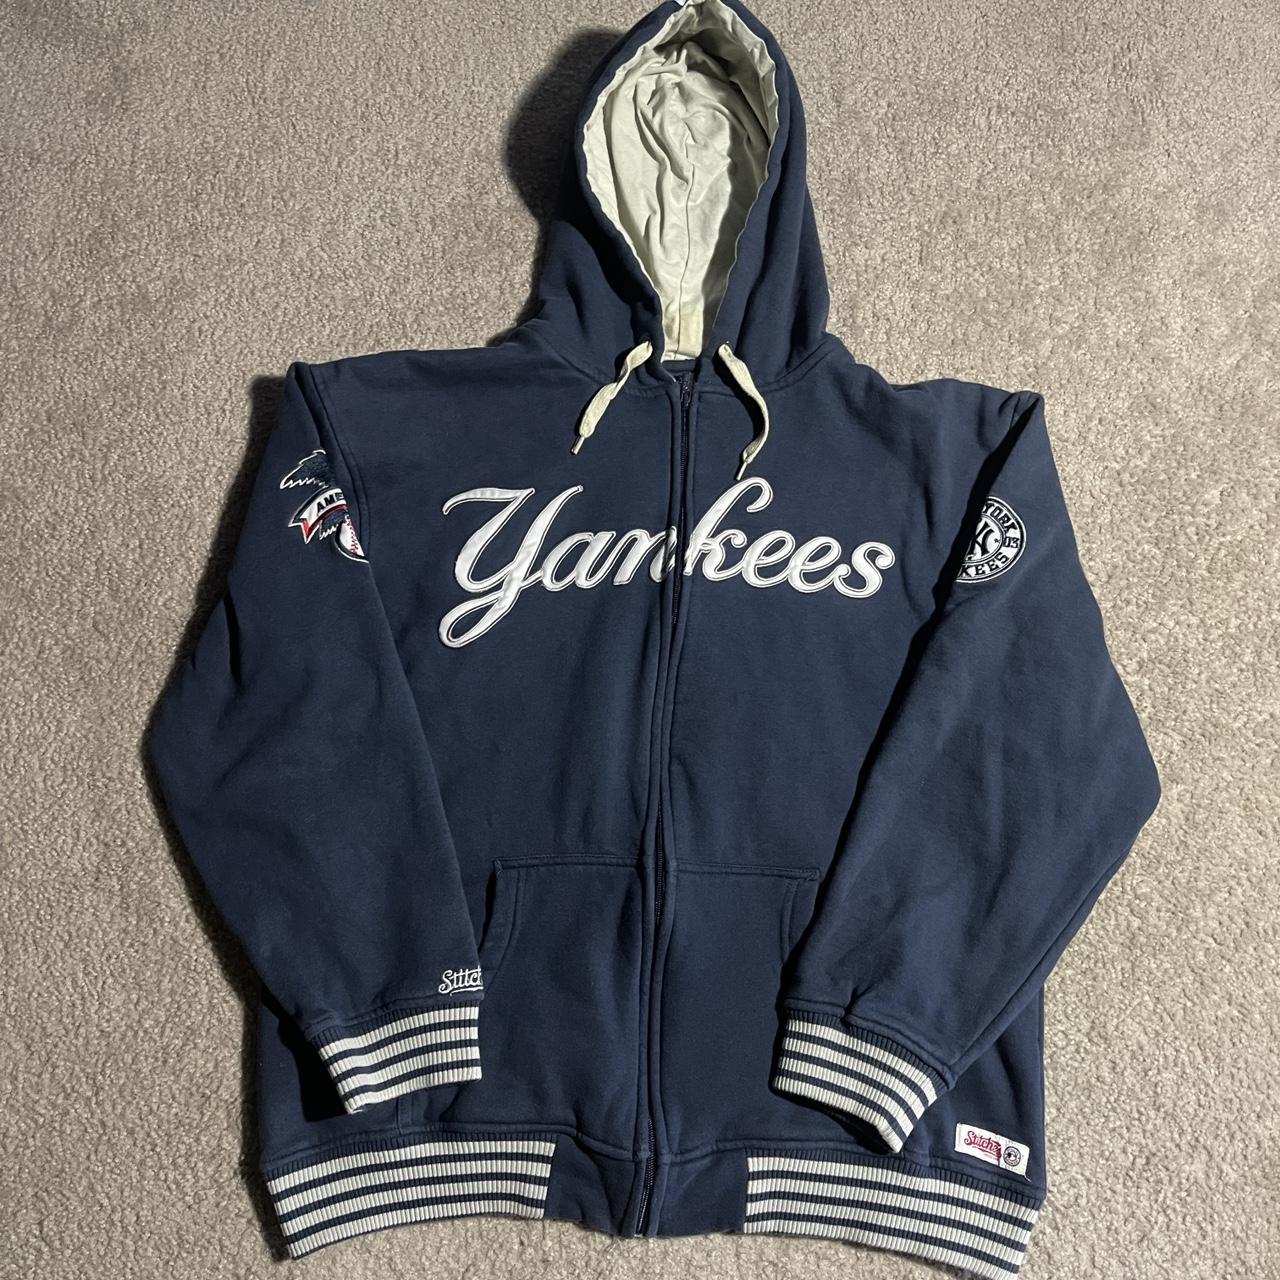 Yankees bomber jacket Tagged size M Dimensions - Depop